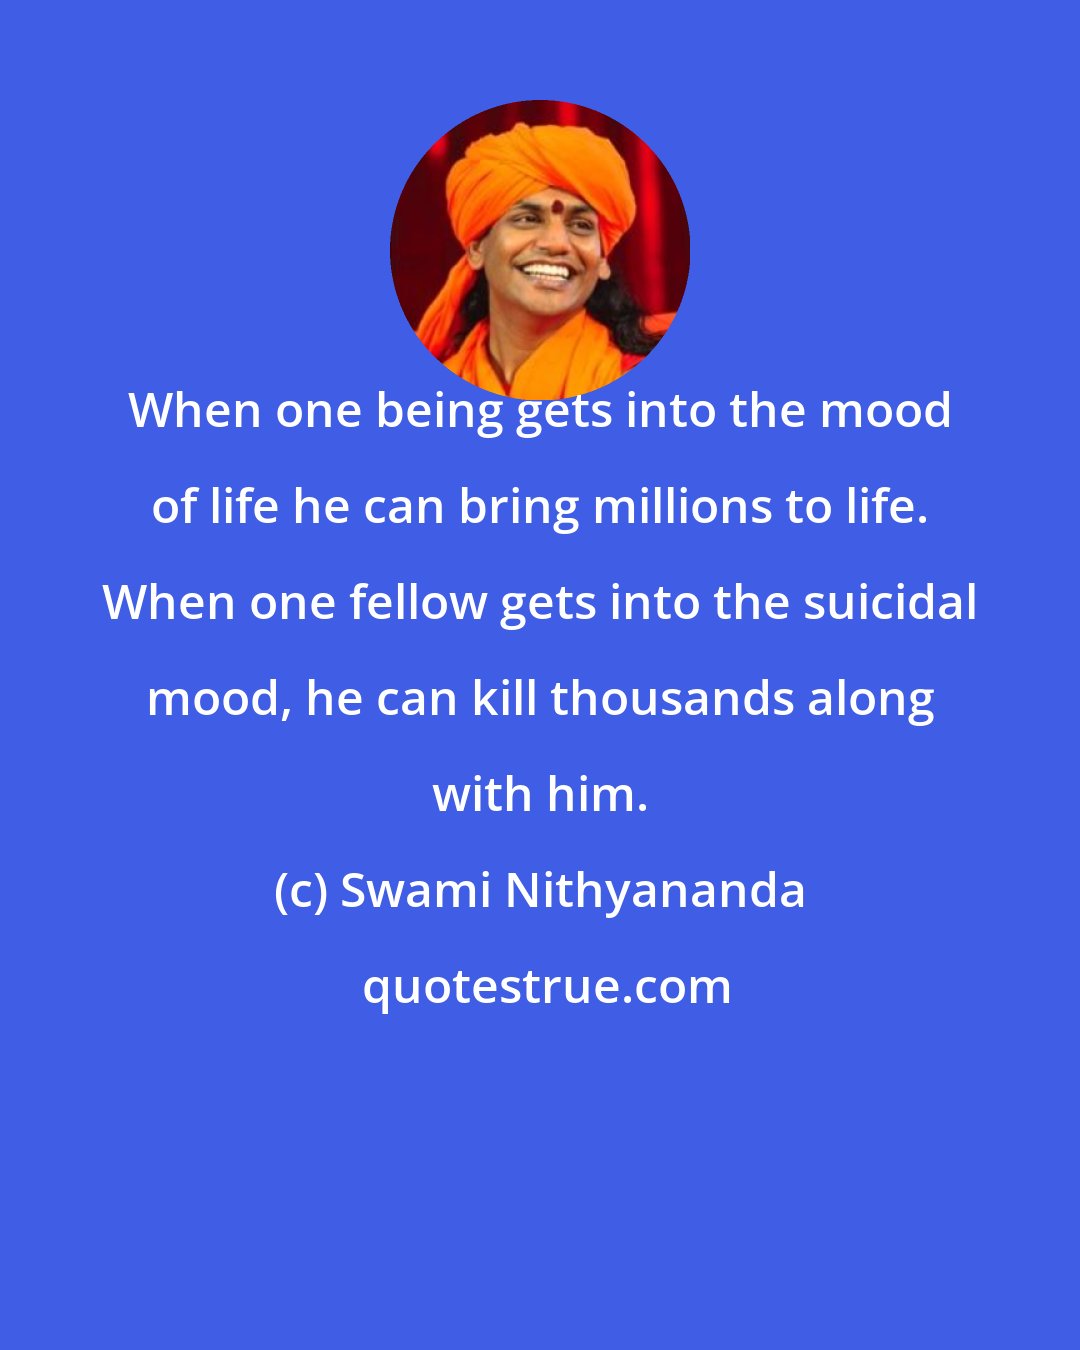 Swami Nithyananda: When one being gets into the mood of life he can bring millions to life. When one fellow gets into the suicidal mood, he can kill thousands along with him.